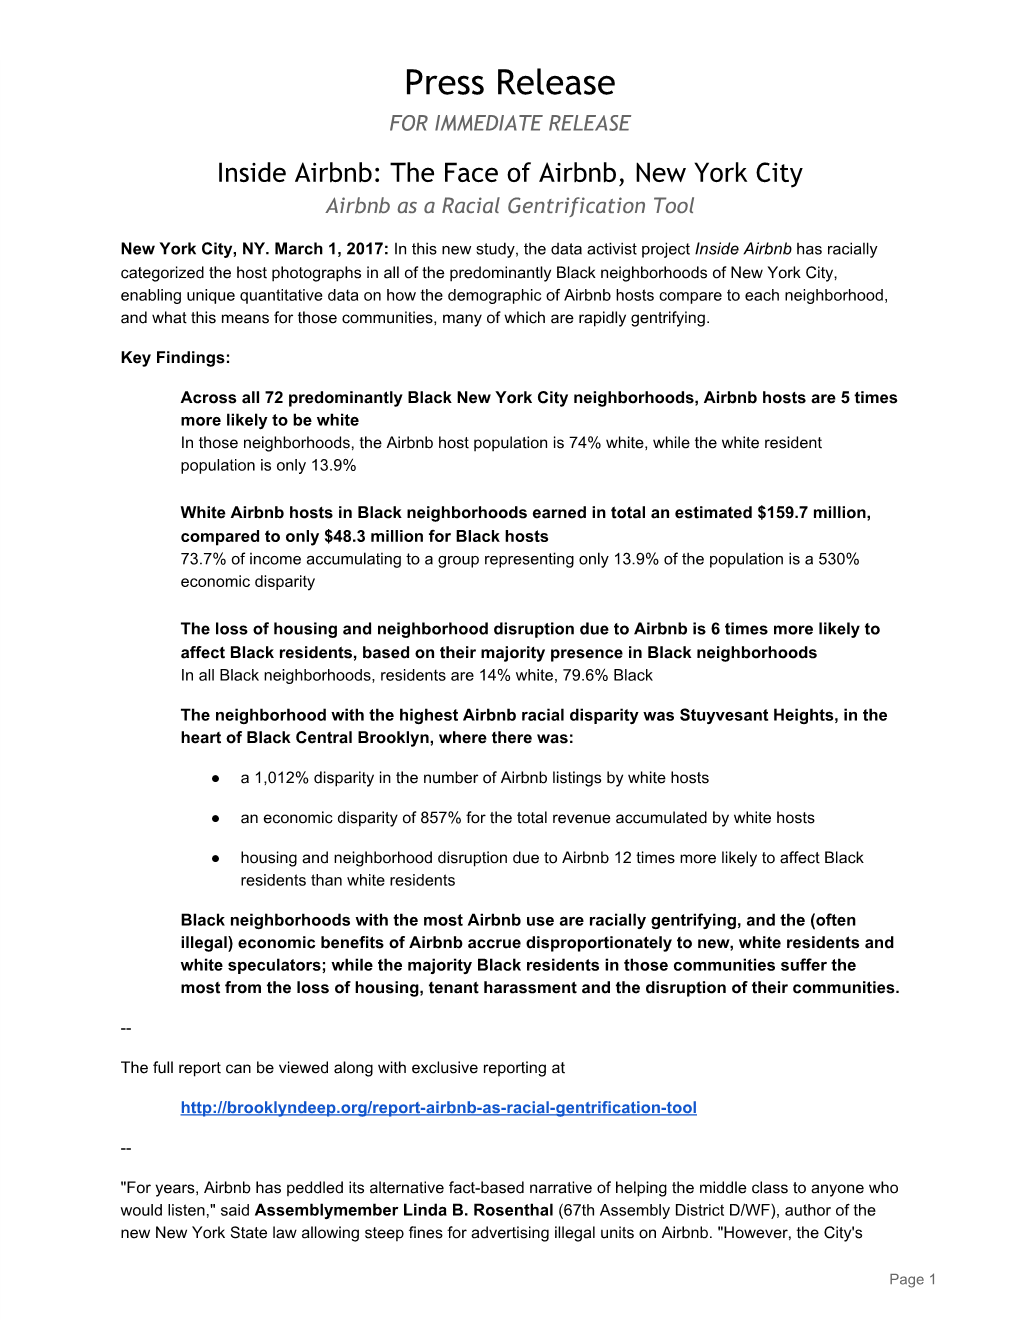 Press Release for IMMEDIATE RELEASE Inside Airbnb: the Face of Airbnb, New York City Airbnb As a Racial Gentrification Tool